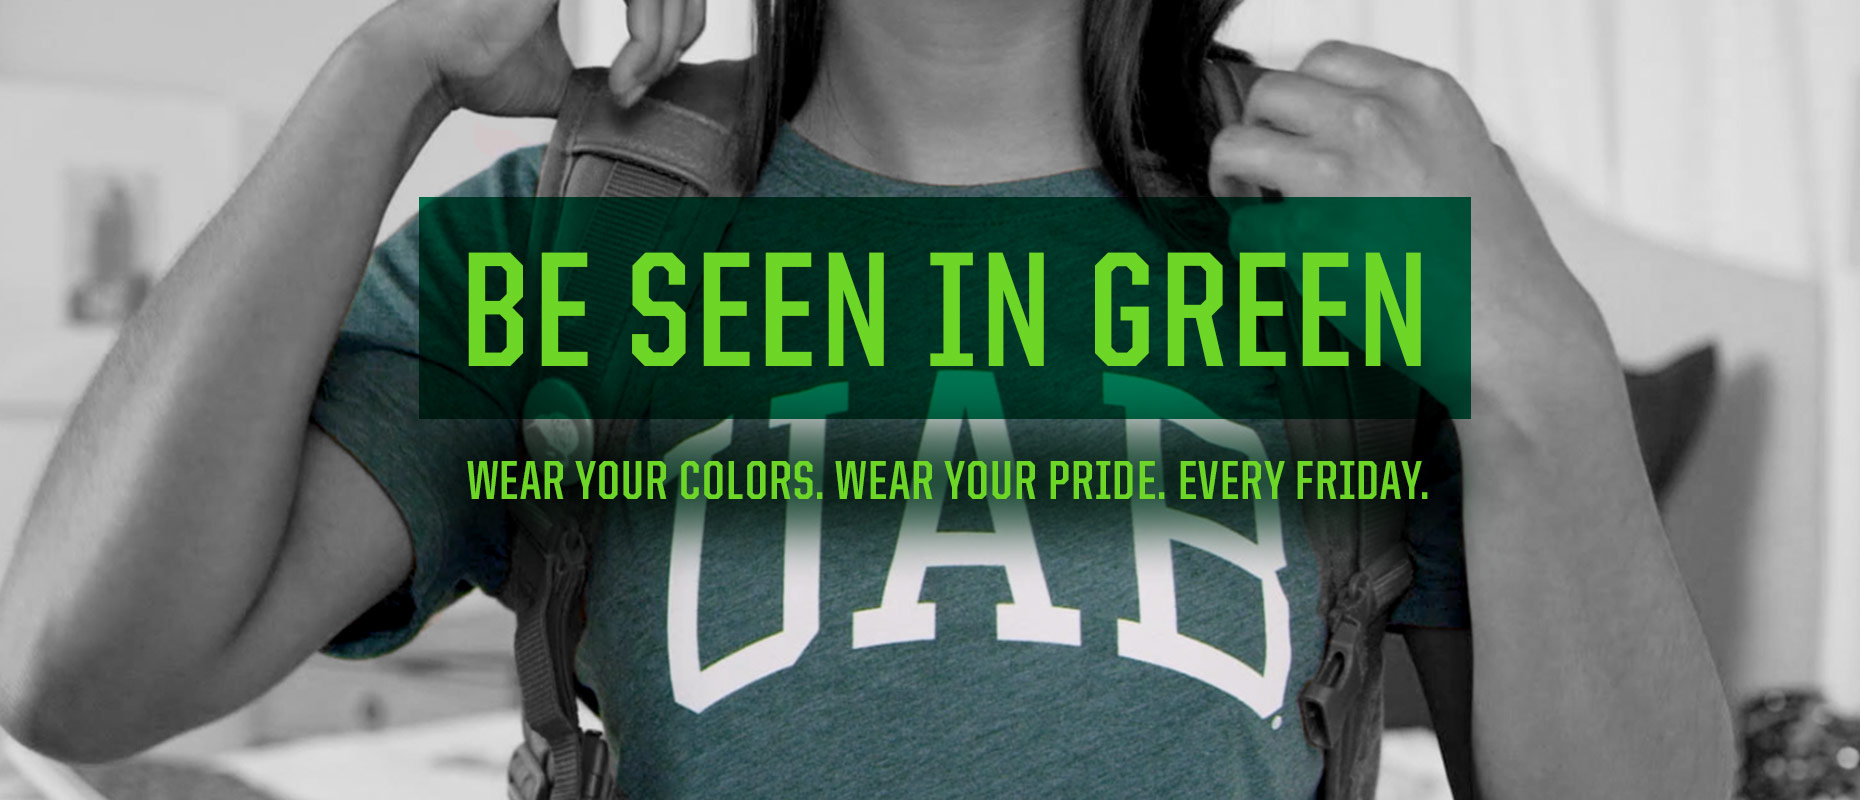 Be seen in green. Wear your colors. Wear your pride. Every Friday.